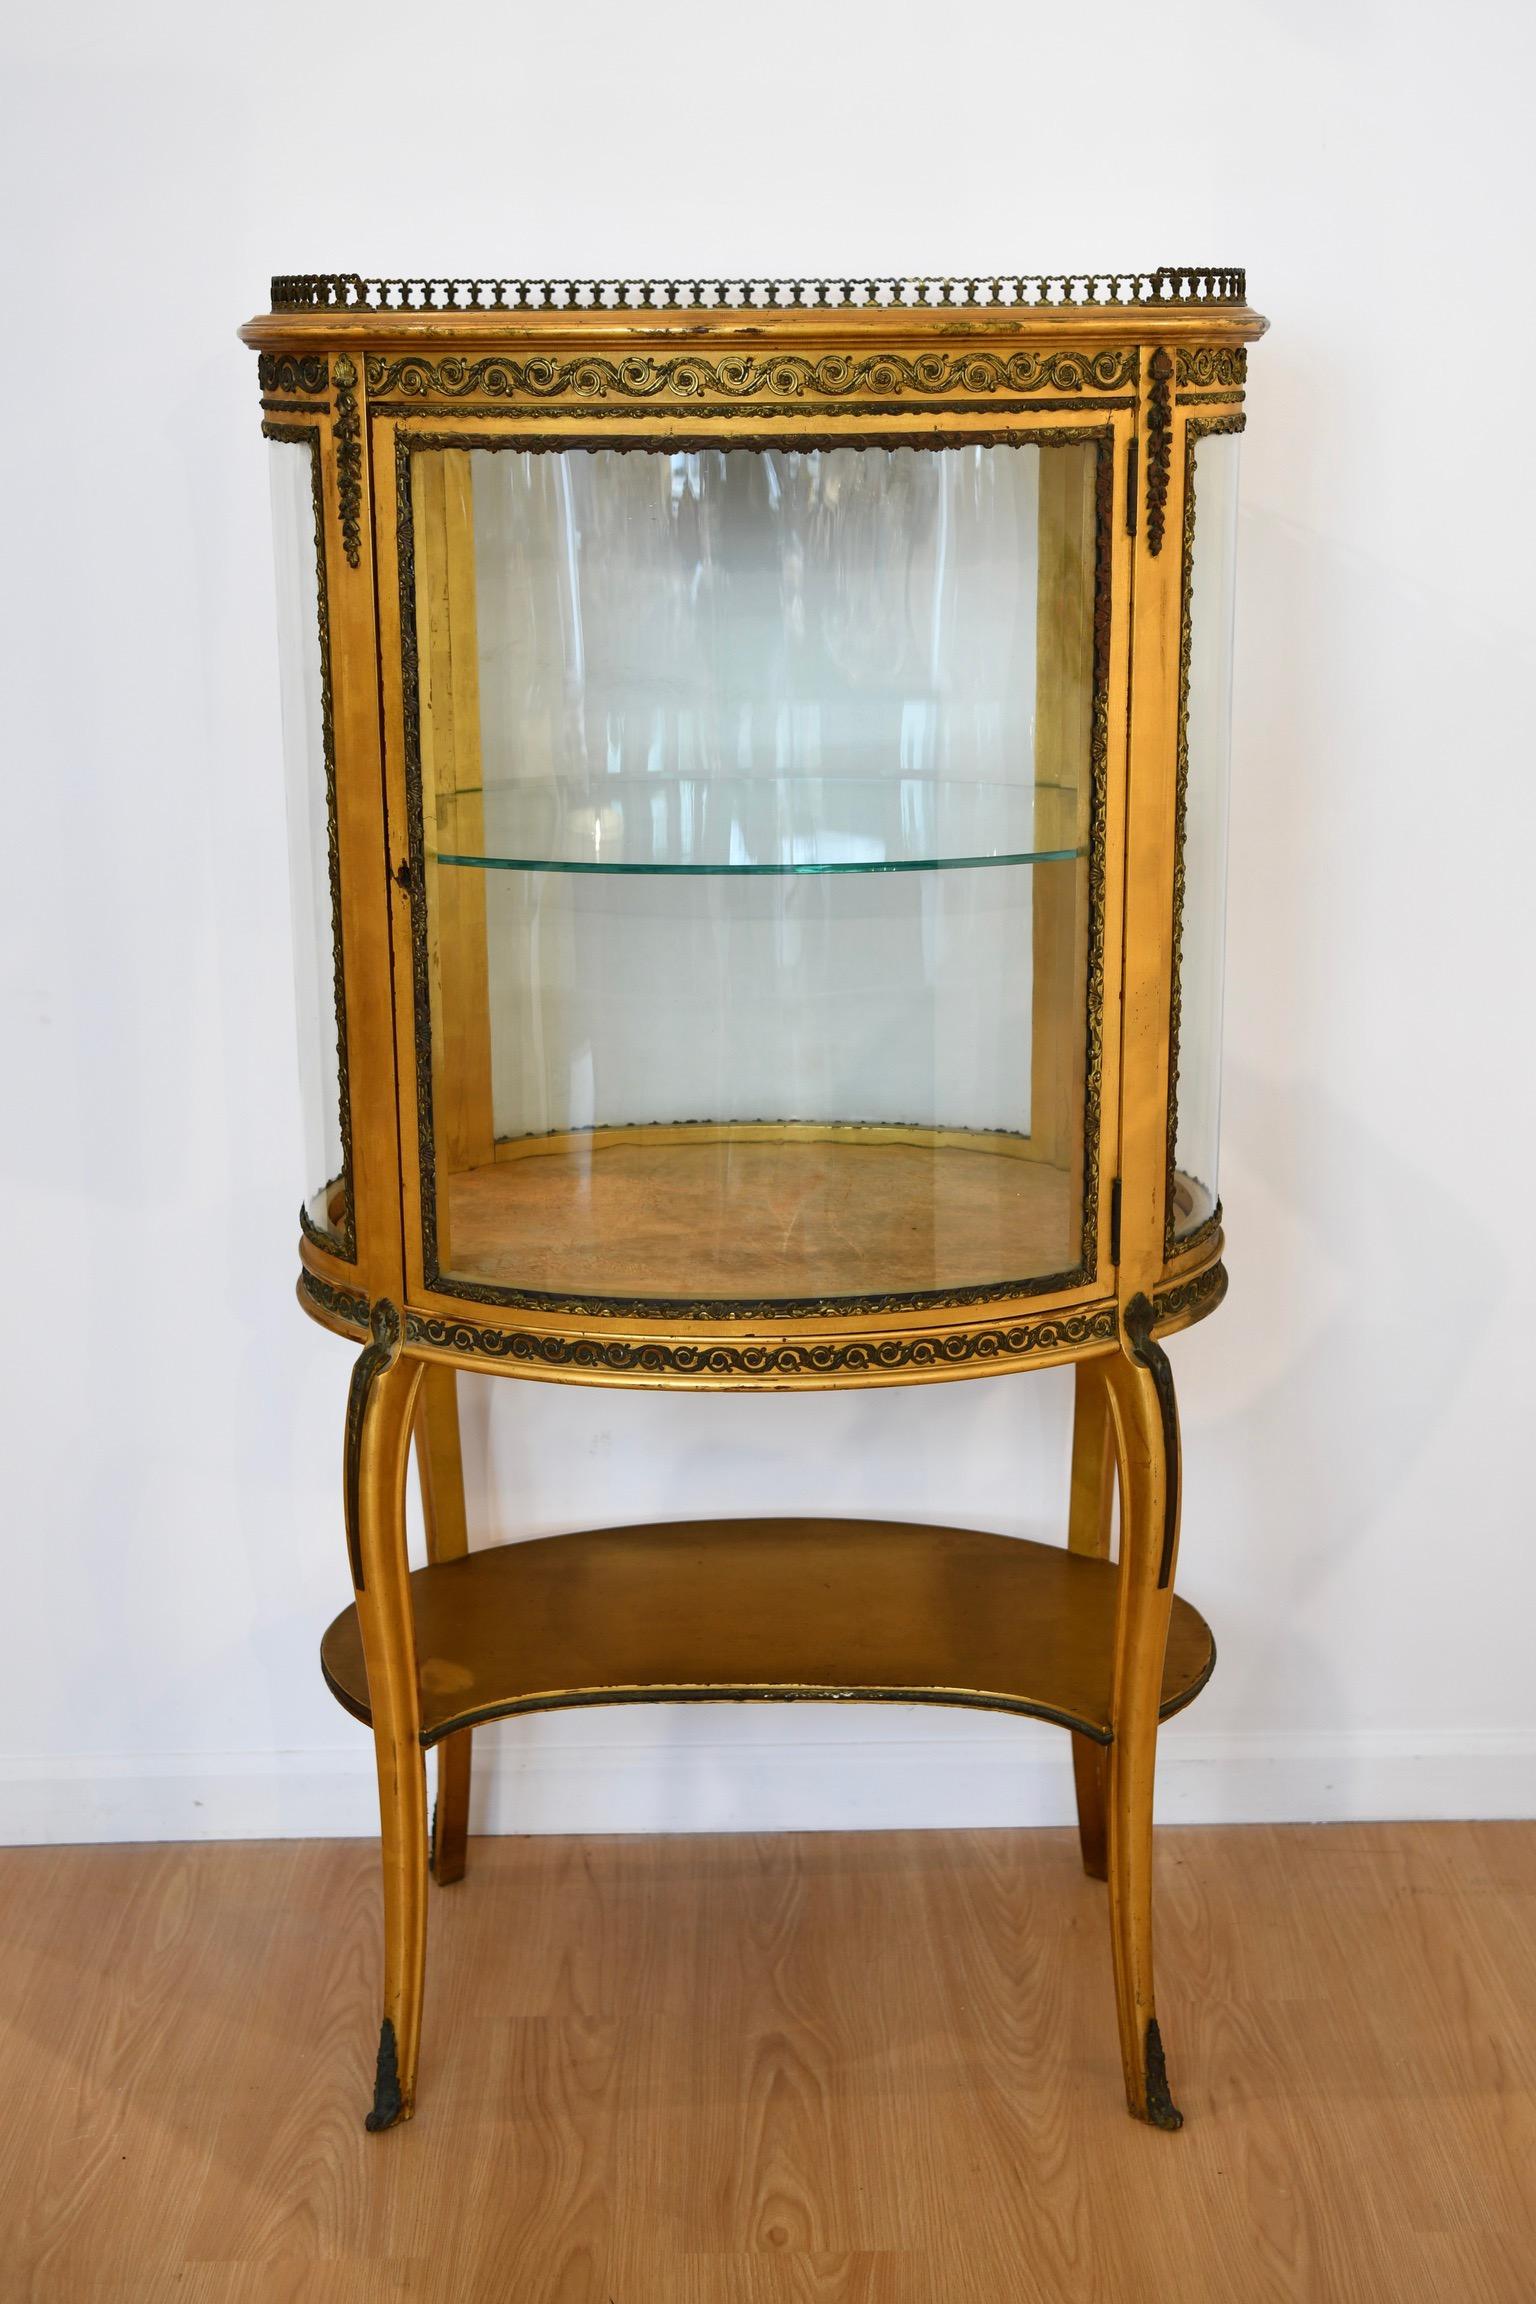 Antique Louis XV style large gilt vitrine or curio with curved glass and bronze mounts. The top is lined with a bronze gallery rail and curio comes with one glass shelf, a fabric lined bottom, and outside lower shelf. Key missing.